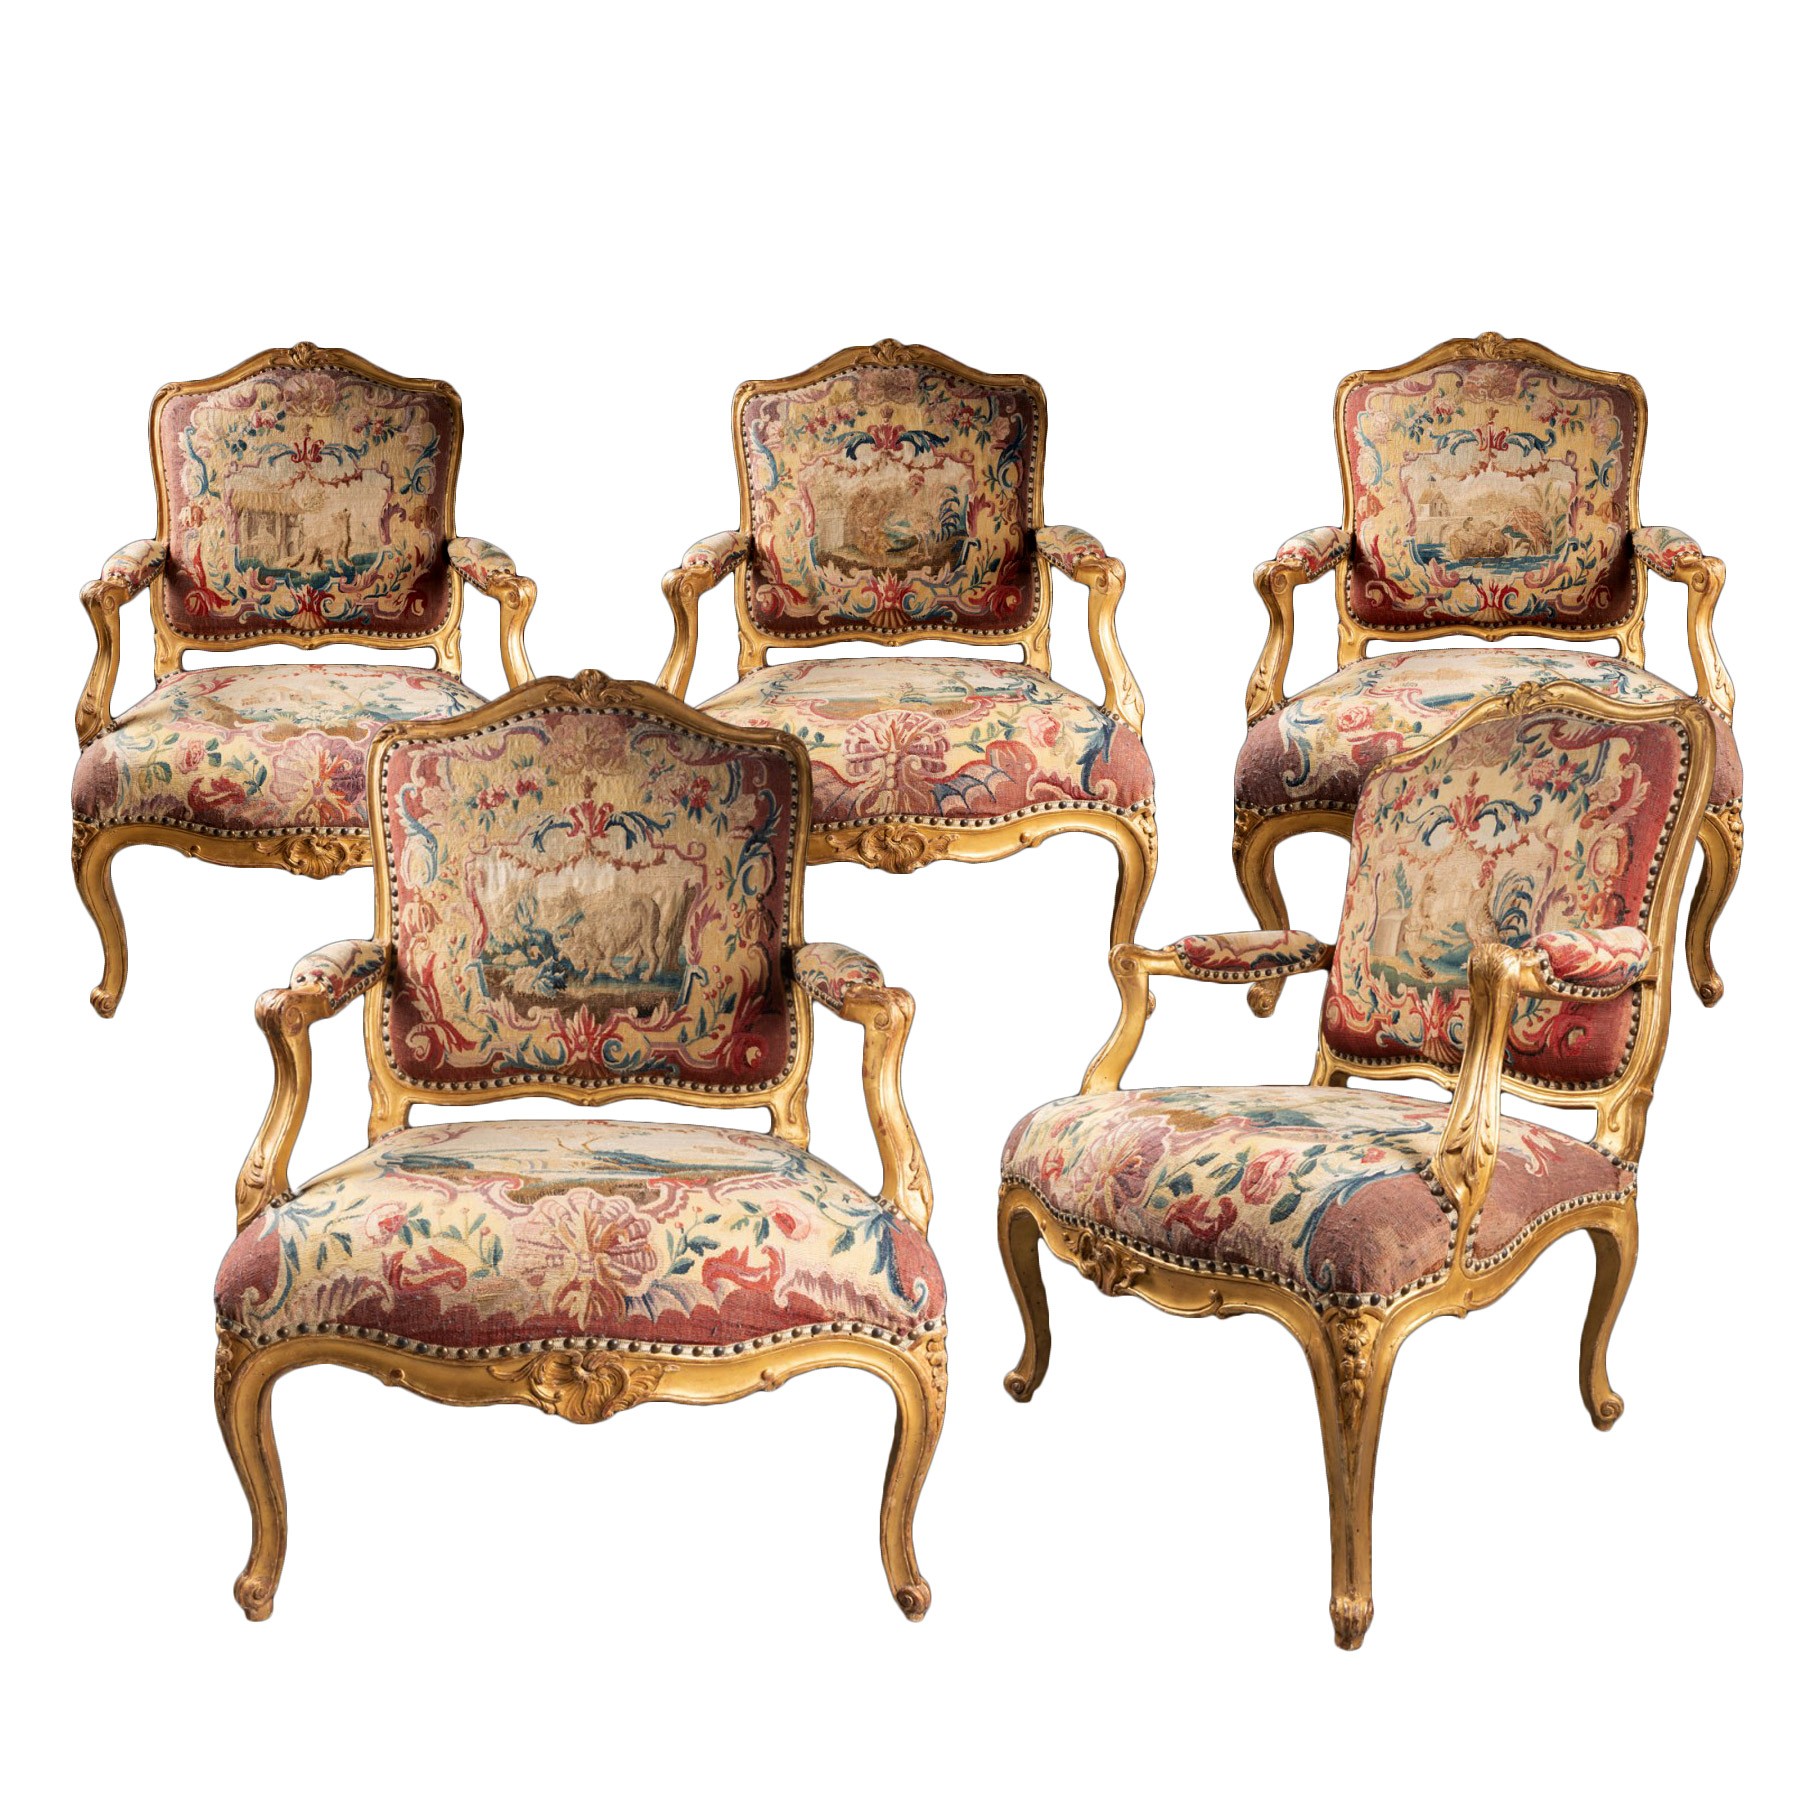 Pair of Late 19th Century French Louis XV Walnut Armchairs